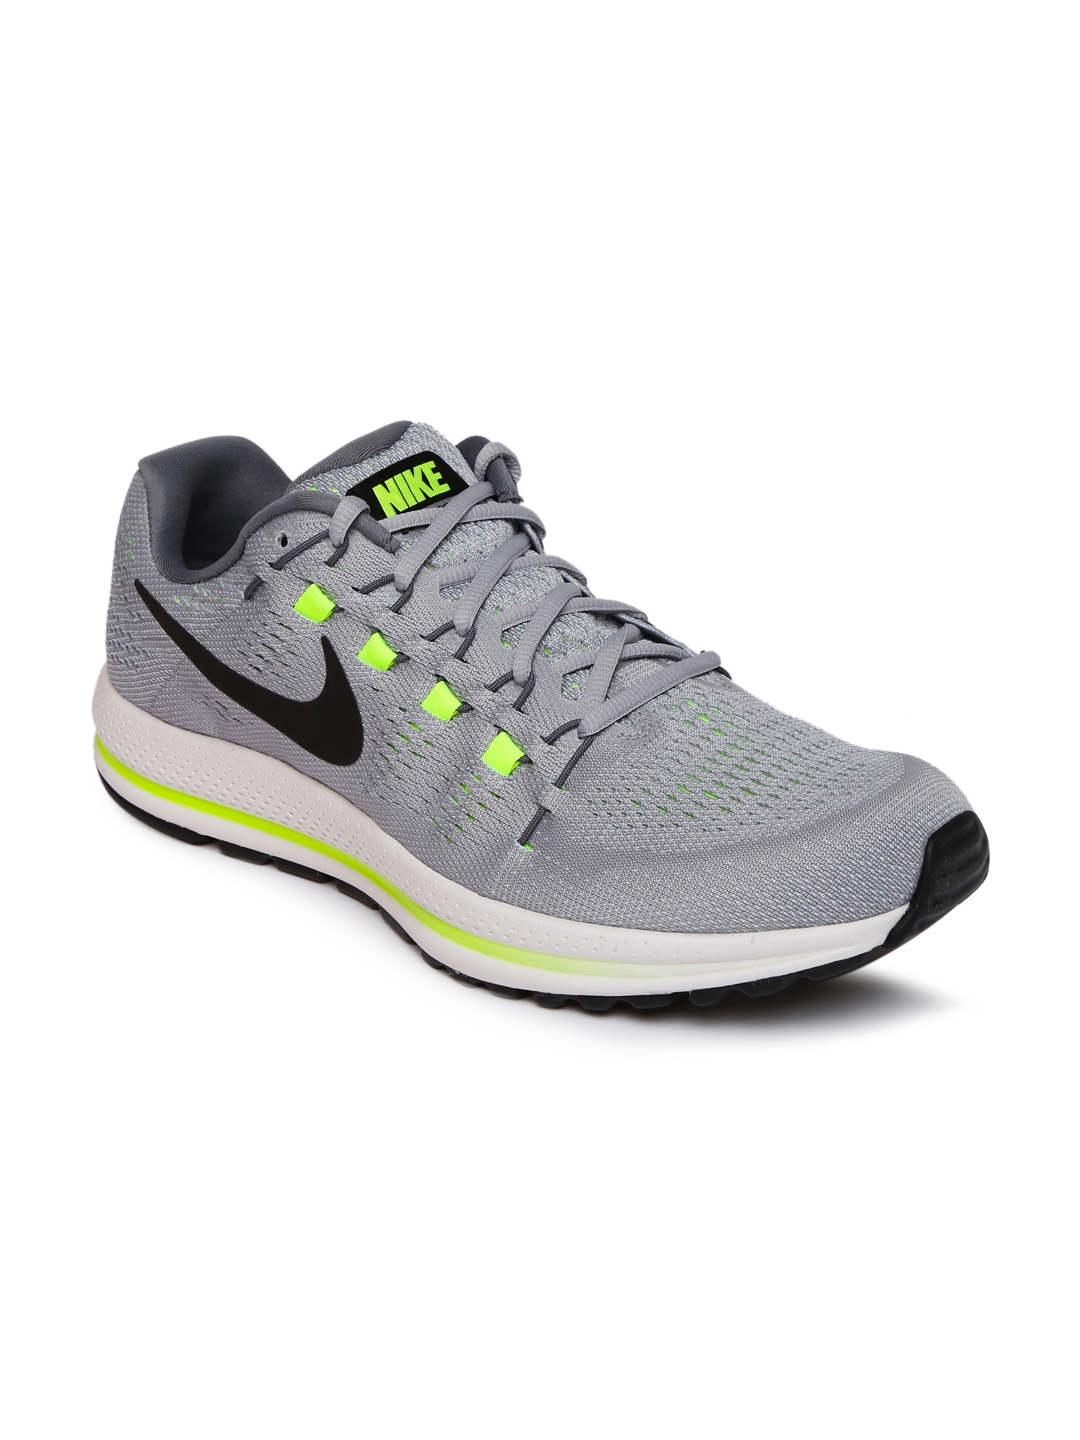 Buy Nike Men Grey Air Zoom Vomero Running Shoes - Sports Shoes for Men | Myntra